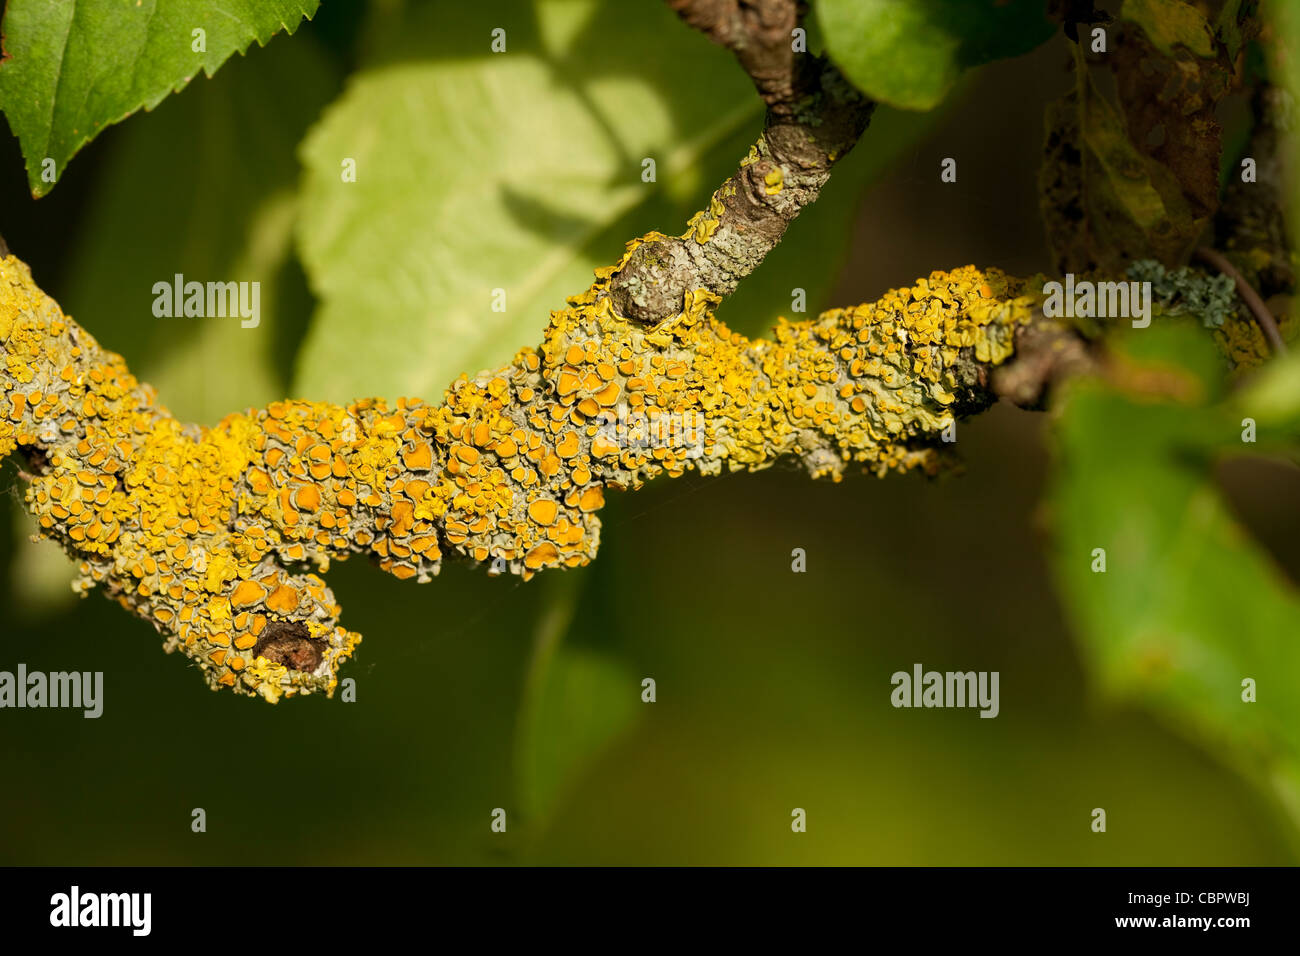 fruit tree with yellow lichen on branch Stock Photo